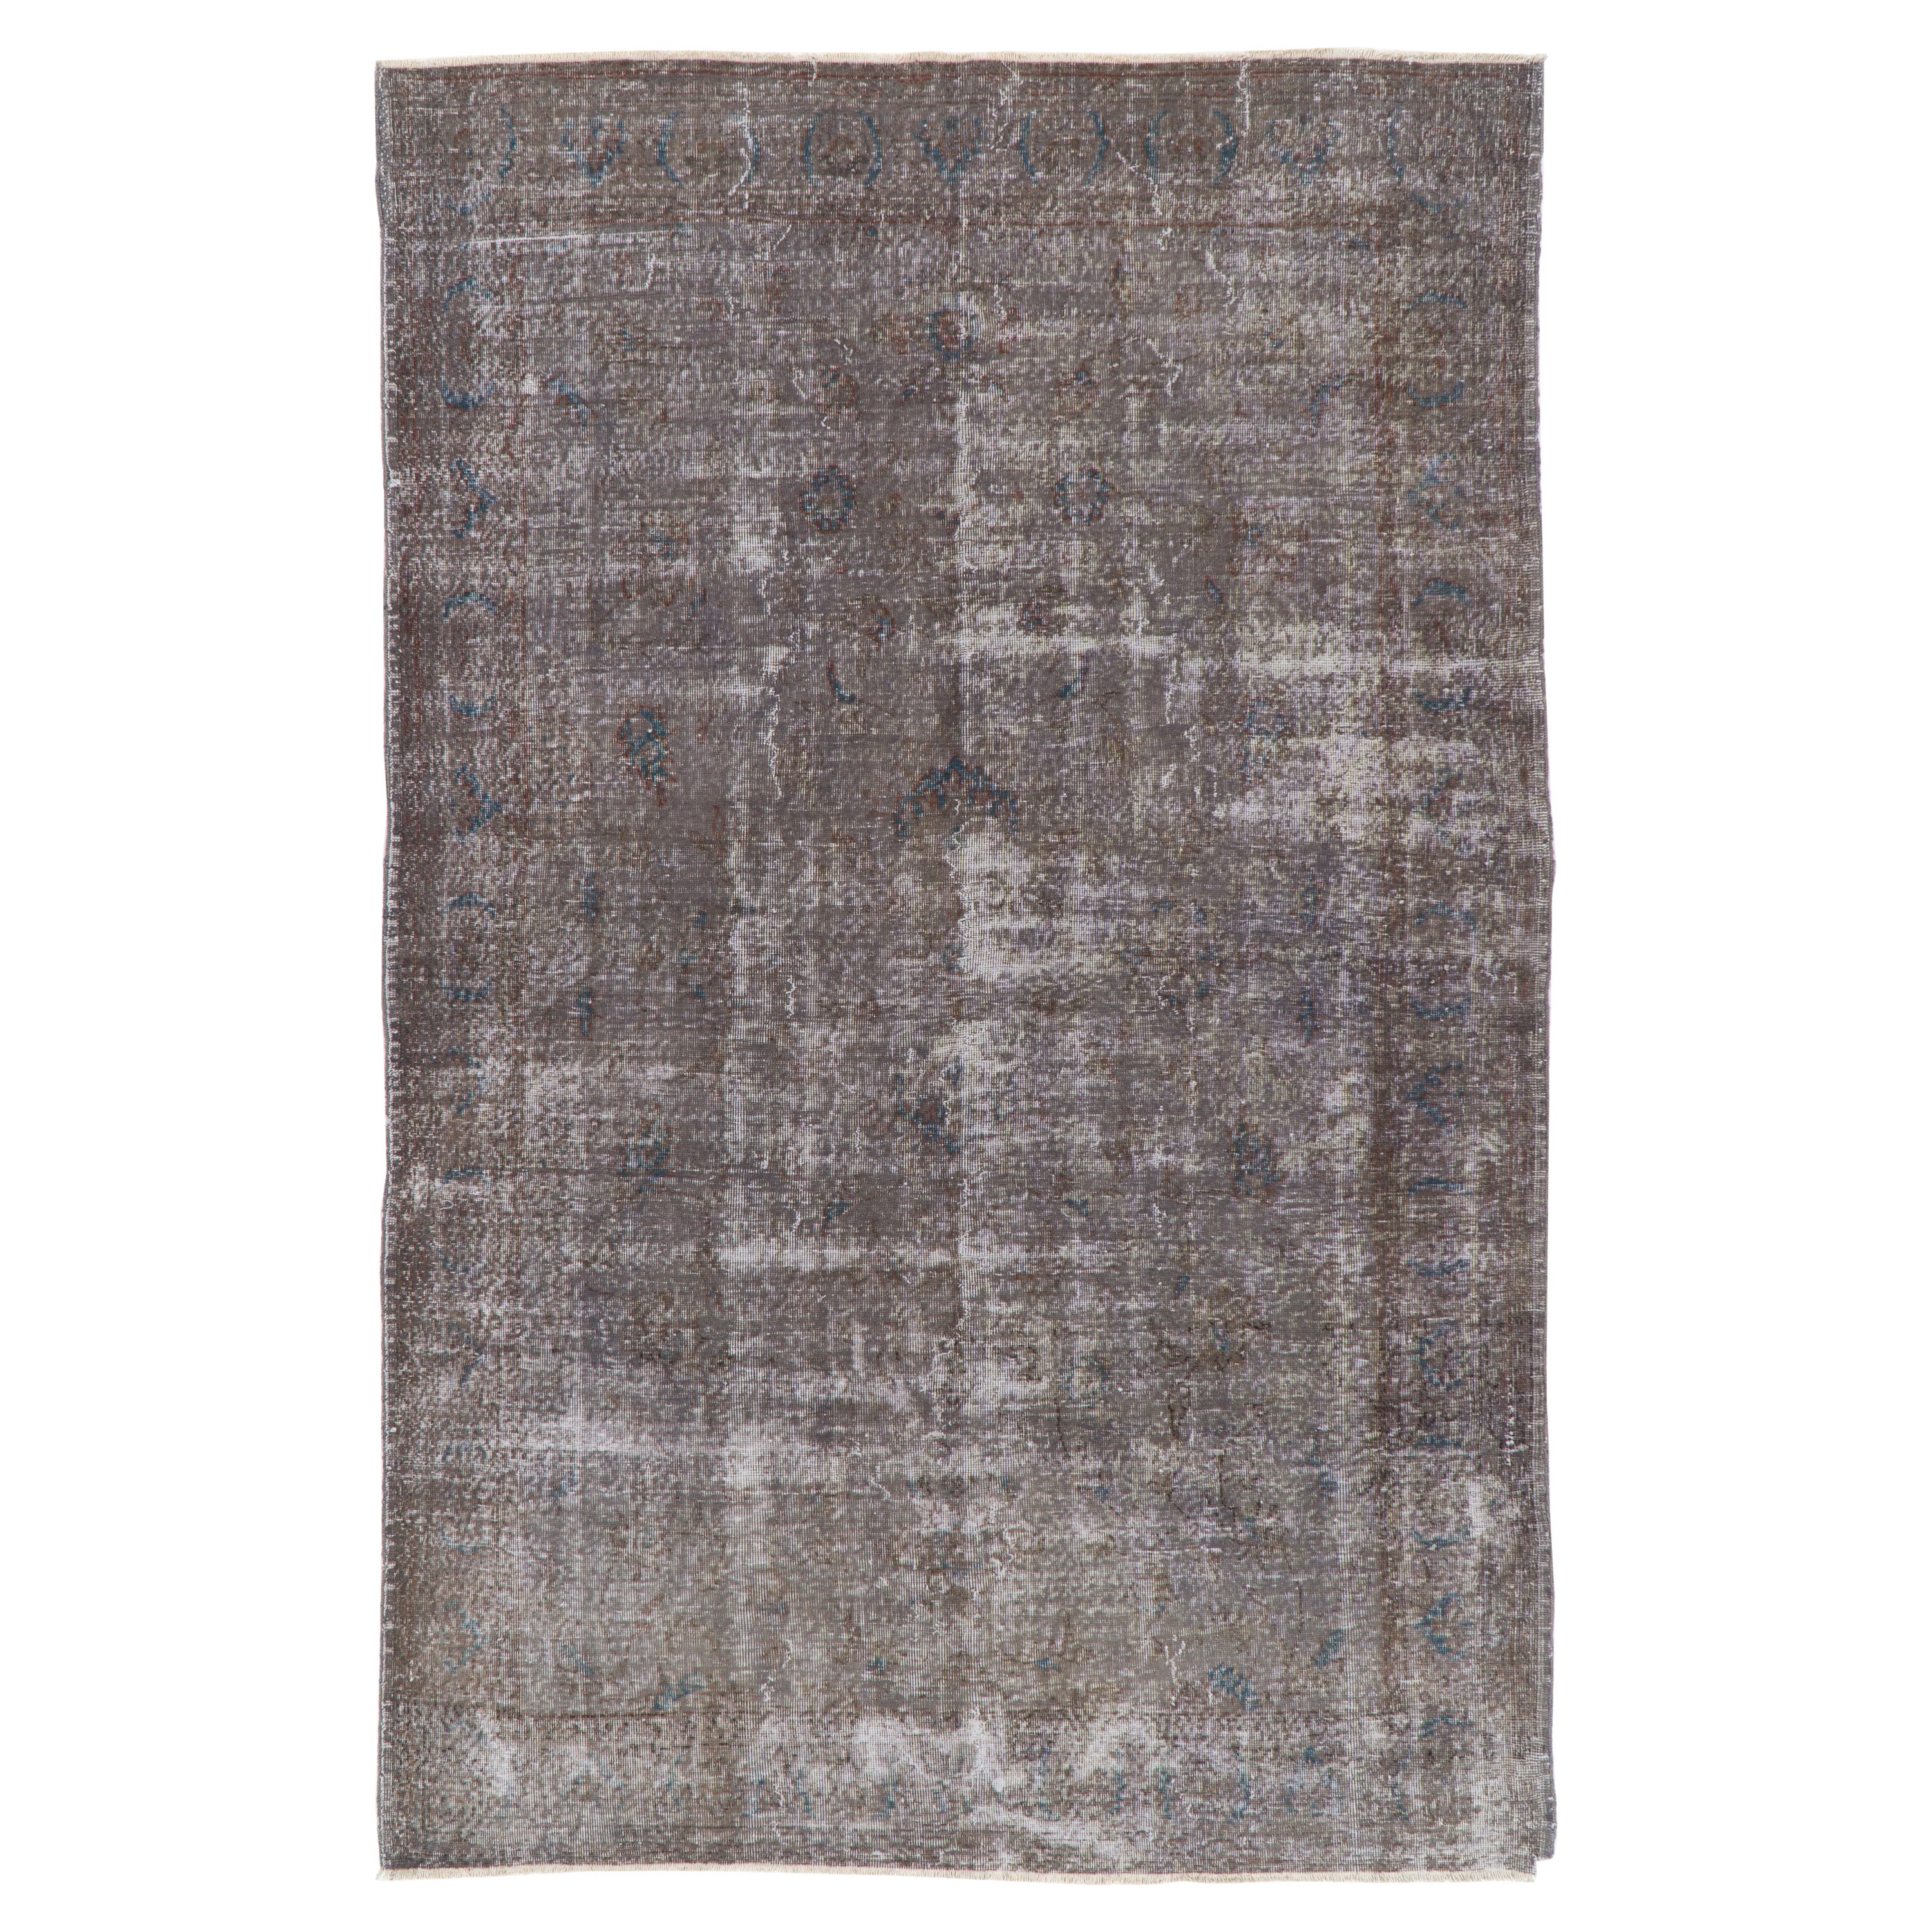 6.4x10 Ft Distressed 1950s Turkish Wool Area Rug. Handmade Taupe Grey Carpet For Sale